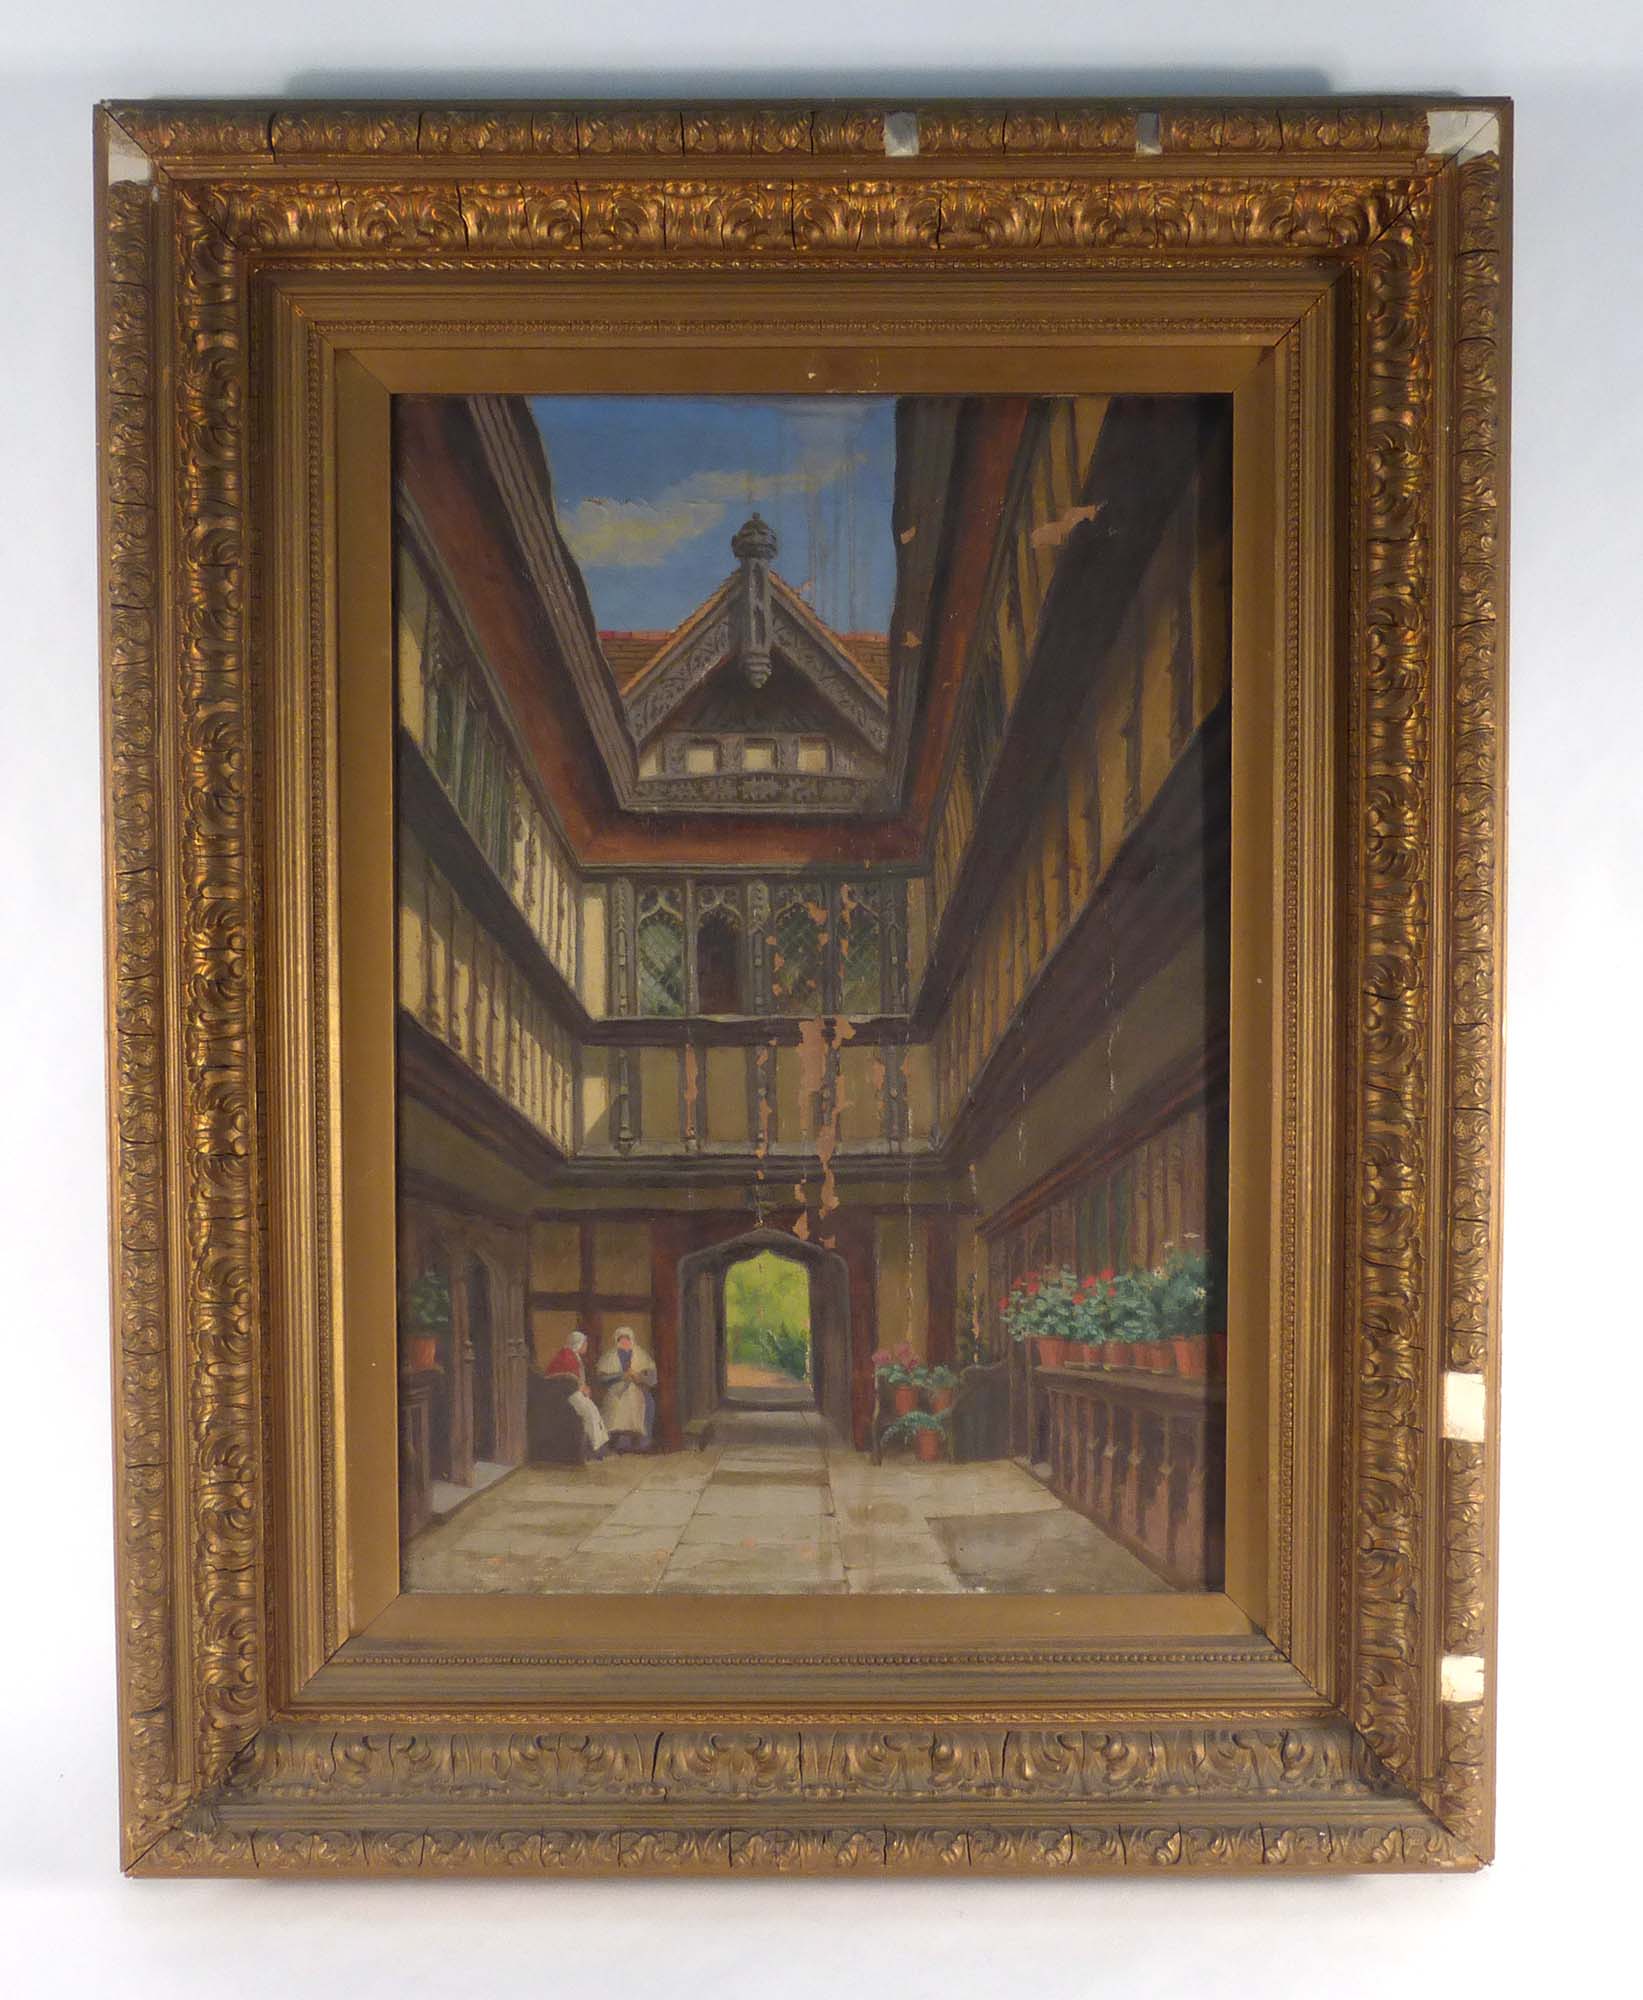 Early 20th century School, a study of a courtyard, oil on canvas,